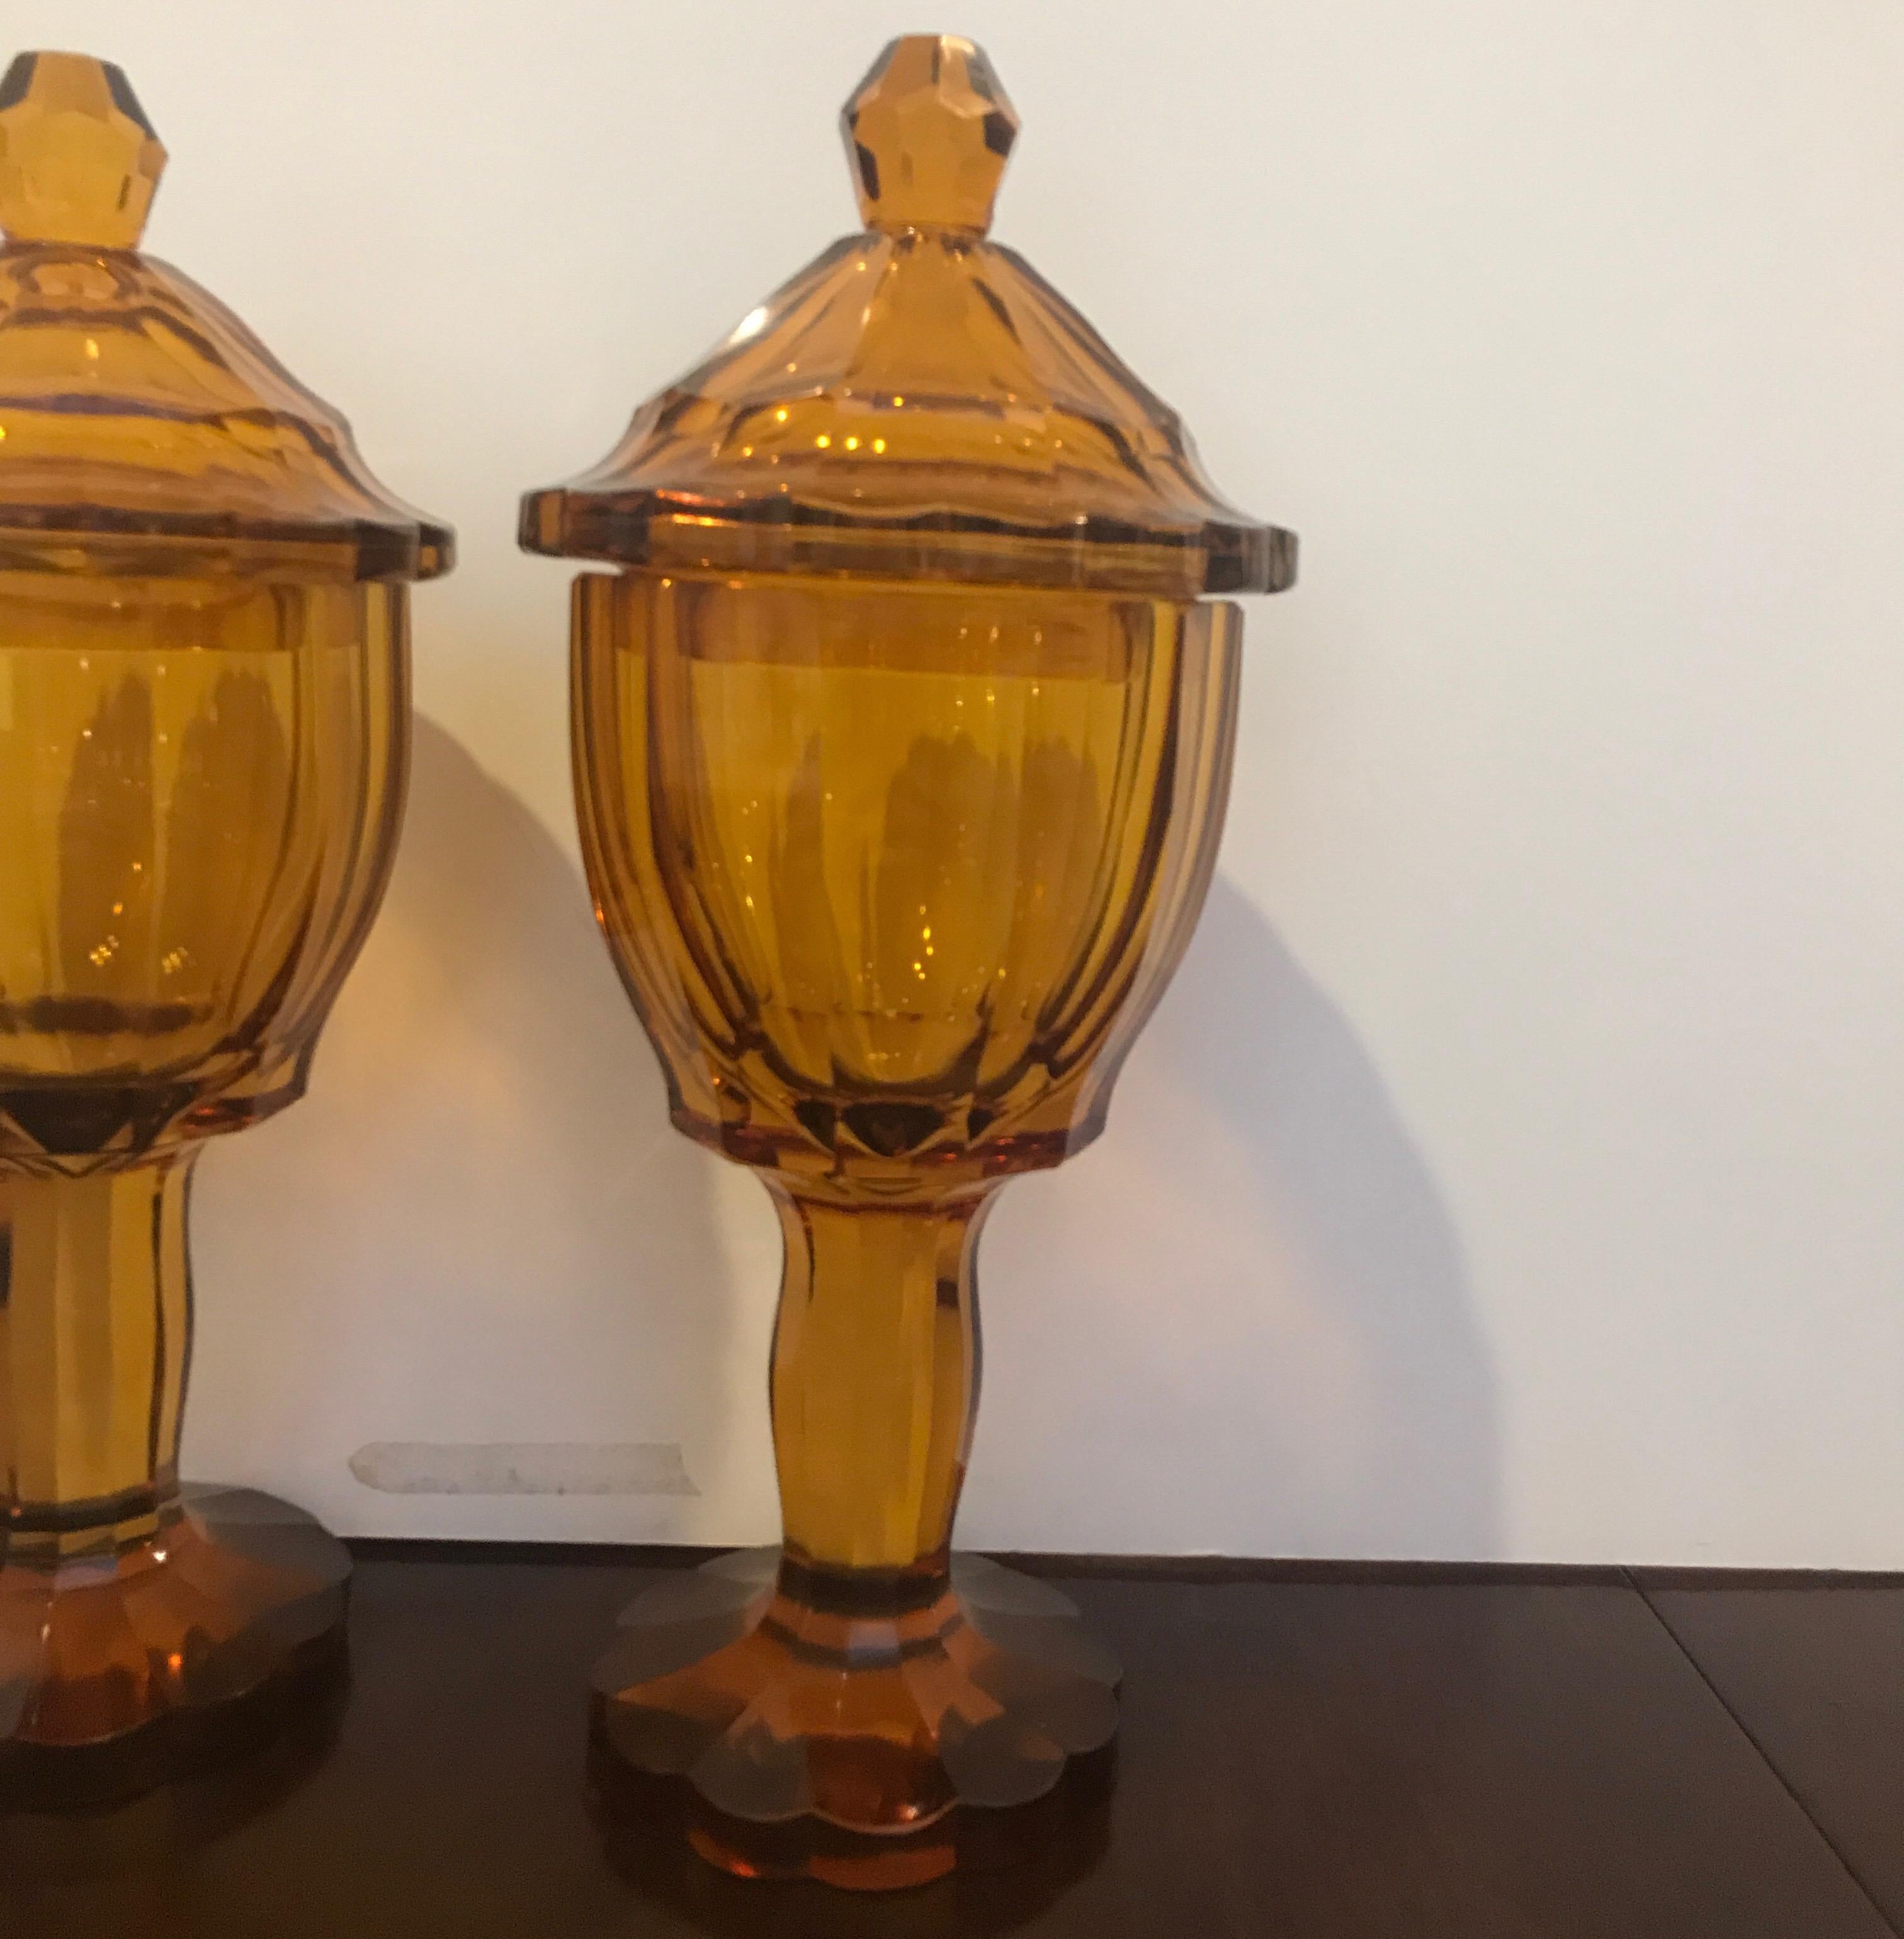 Handsome pair of Austrian panel cut glass covered chalices. The polished panel cuts start at the top of the lids and follow down the chalice bowls down to the pedestal bases. Each one is hand blown, handcut and polished on a wheel with the polished